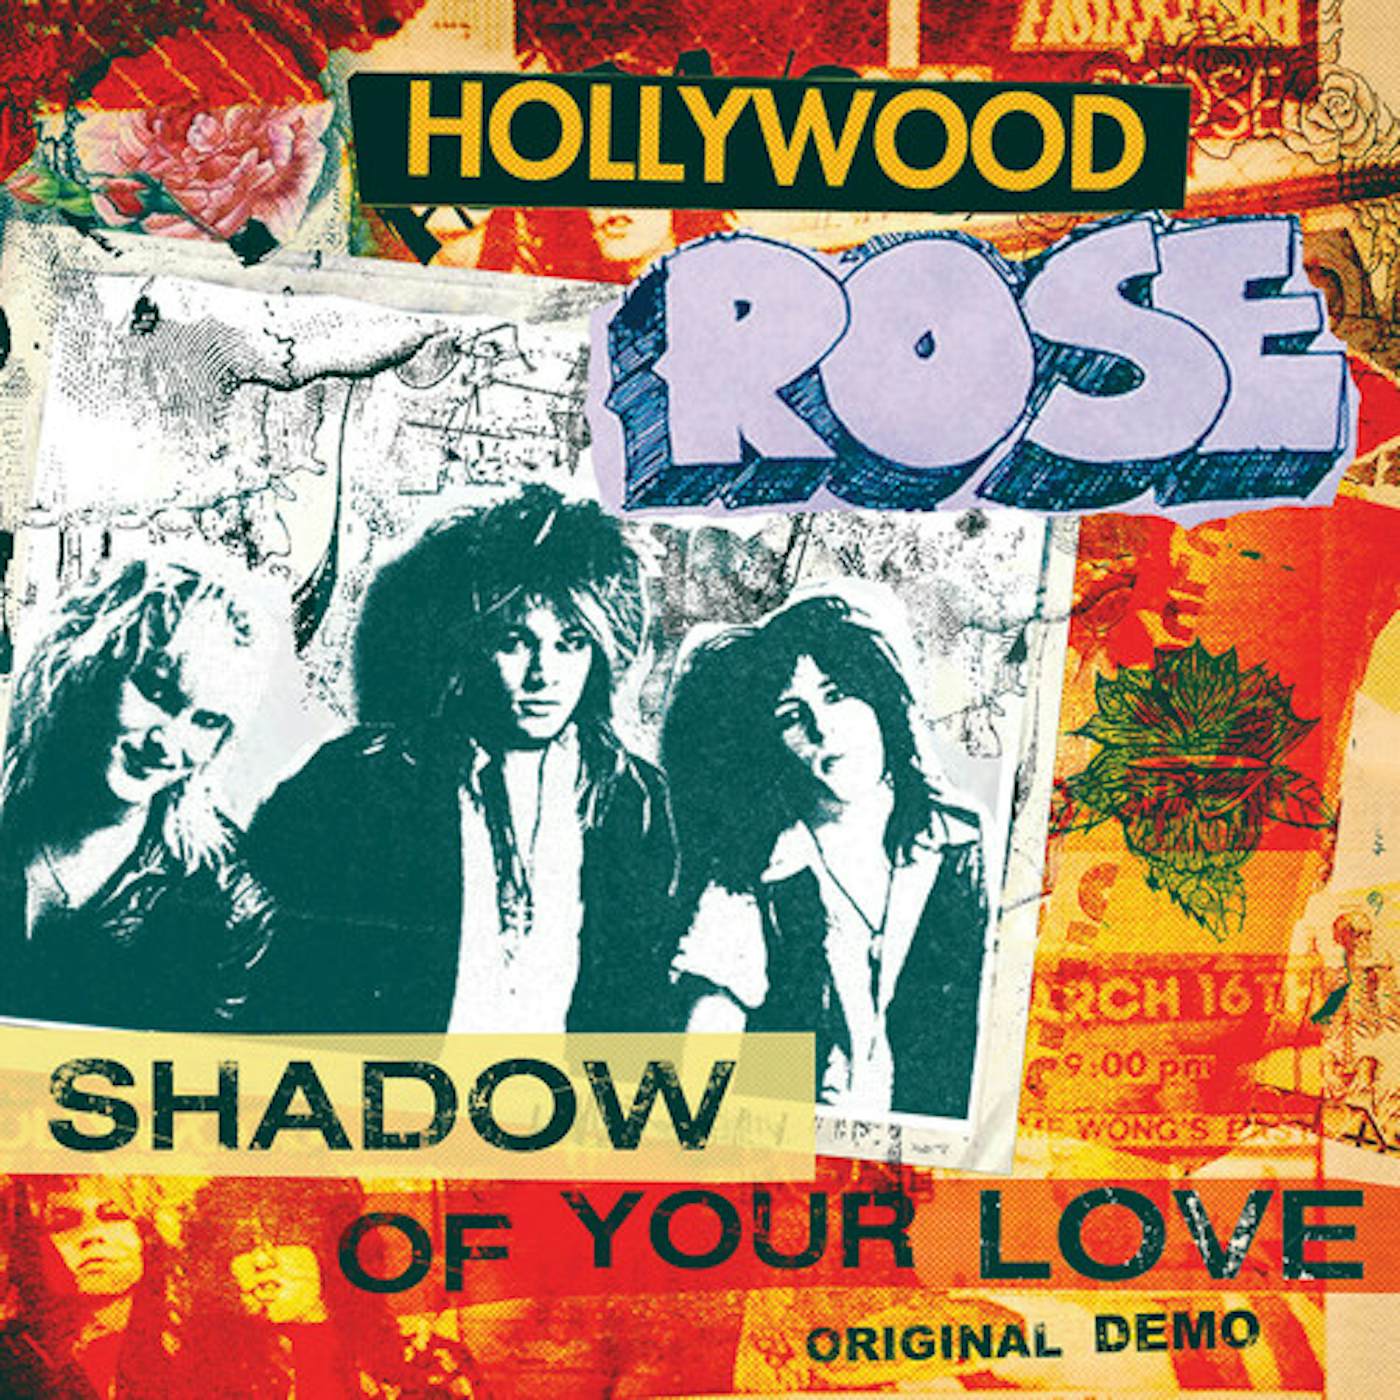 Hollywood Rose SHADOW OF YOUR LOVE / RECKLESS LIFE Vinyl Record - Blue Vinyl